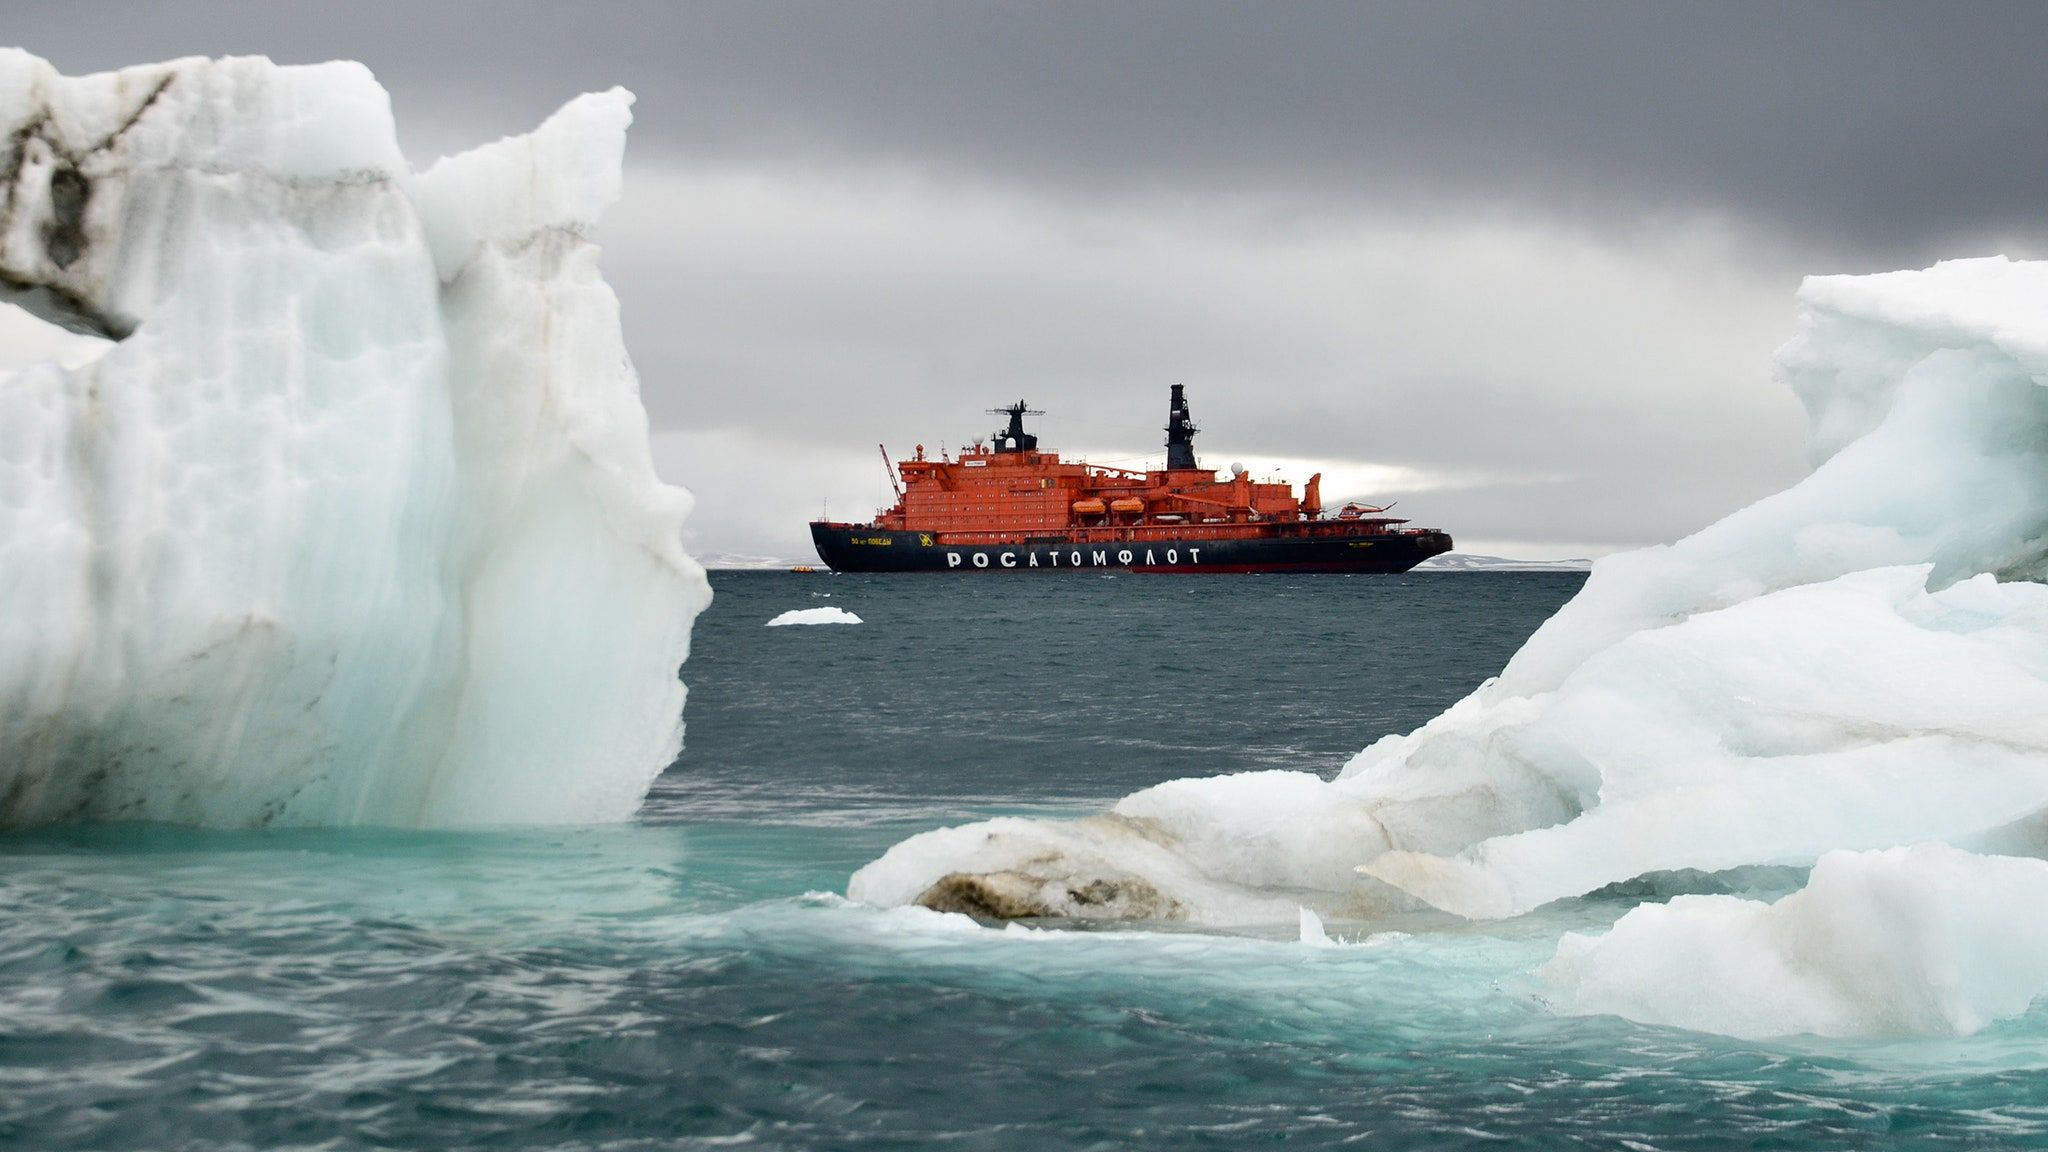 What It's Really Like to Voyage to the North Pole. Condé Nast Traveler